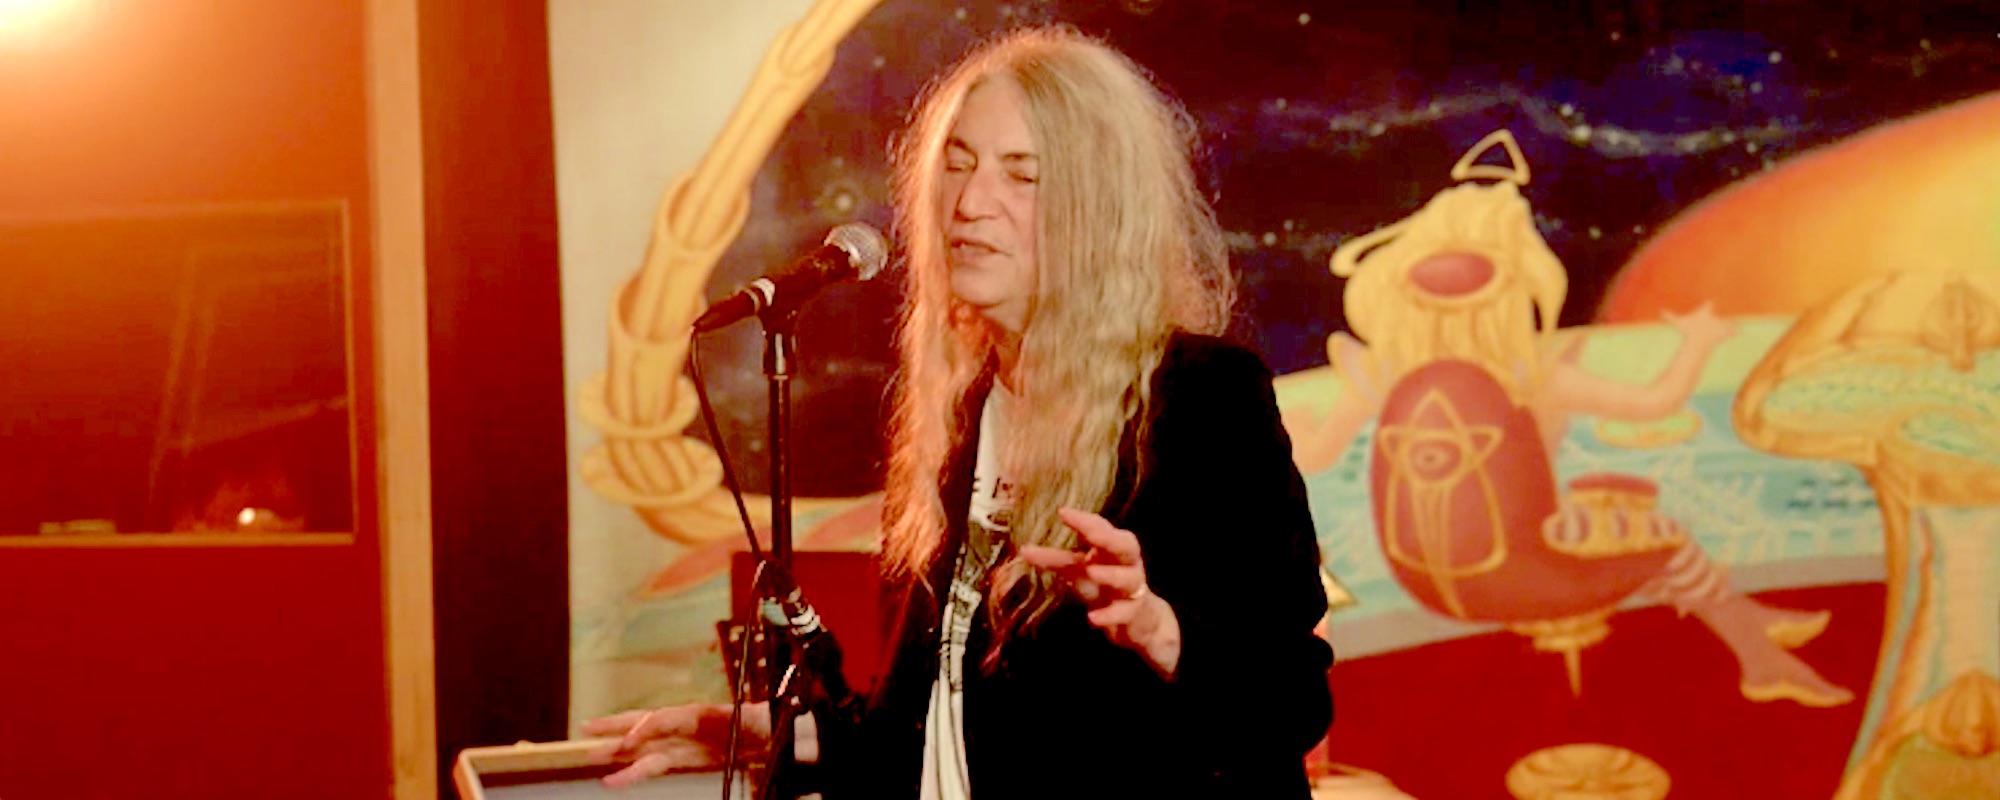 Patti Smith Moves Through Song and Stories During Electric Lady Studios Performance